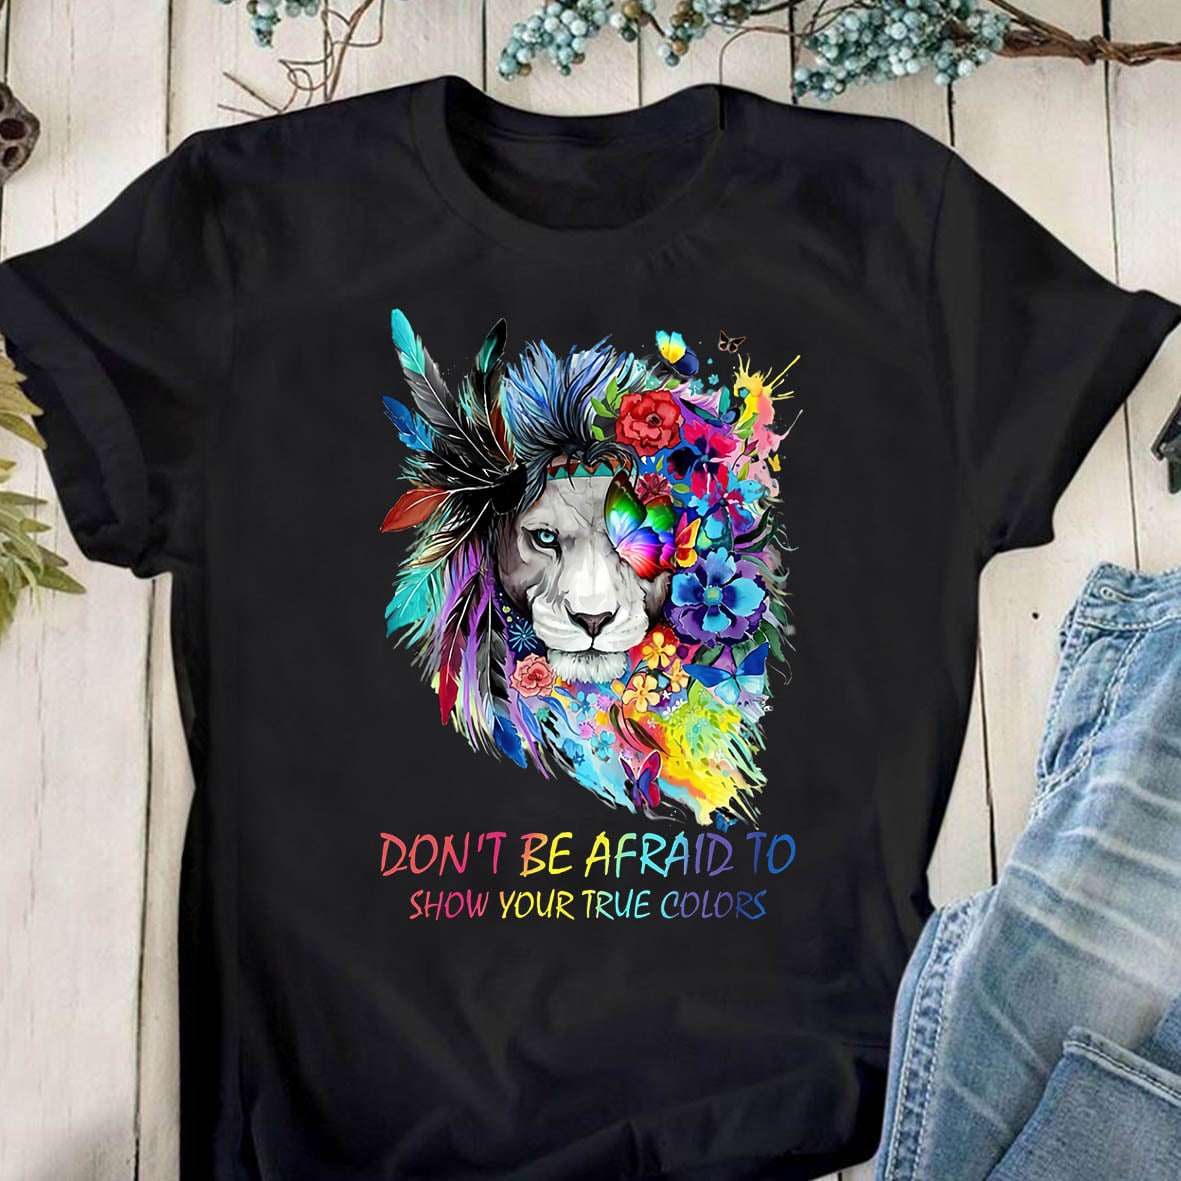 Don't be afraid to show your true colors - Colorful lion, lgbt ...